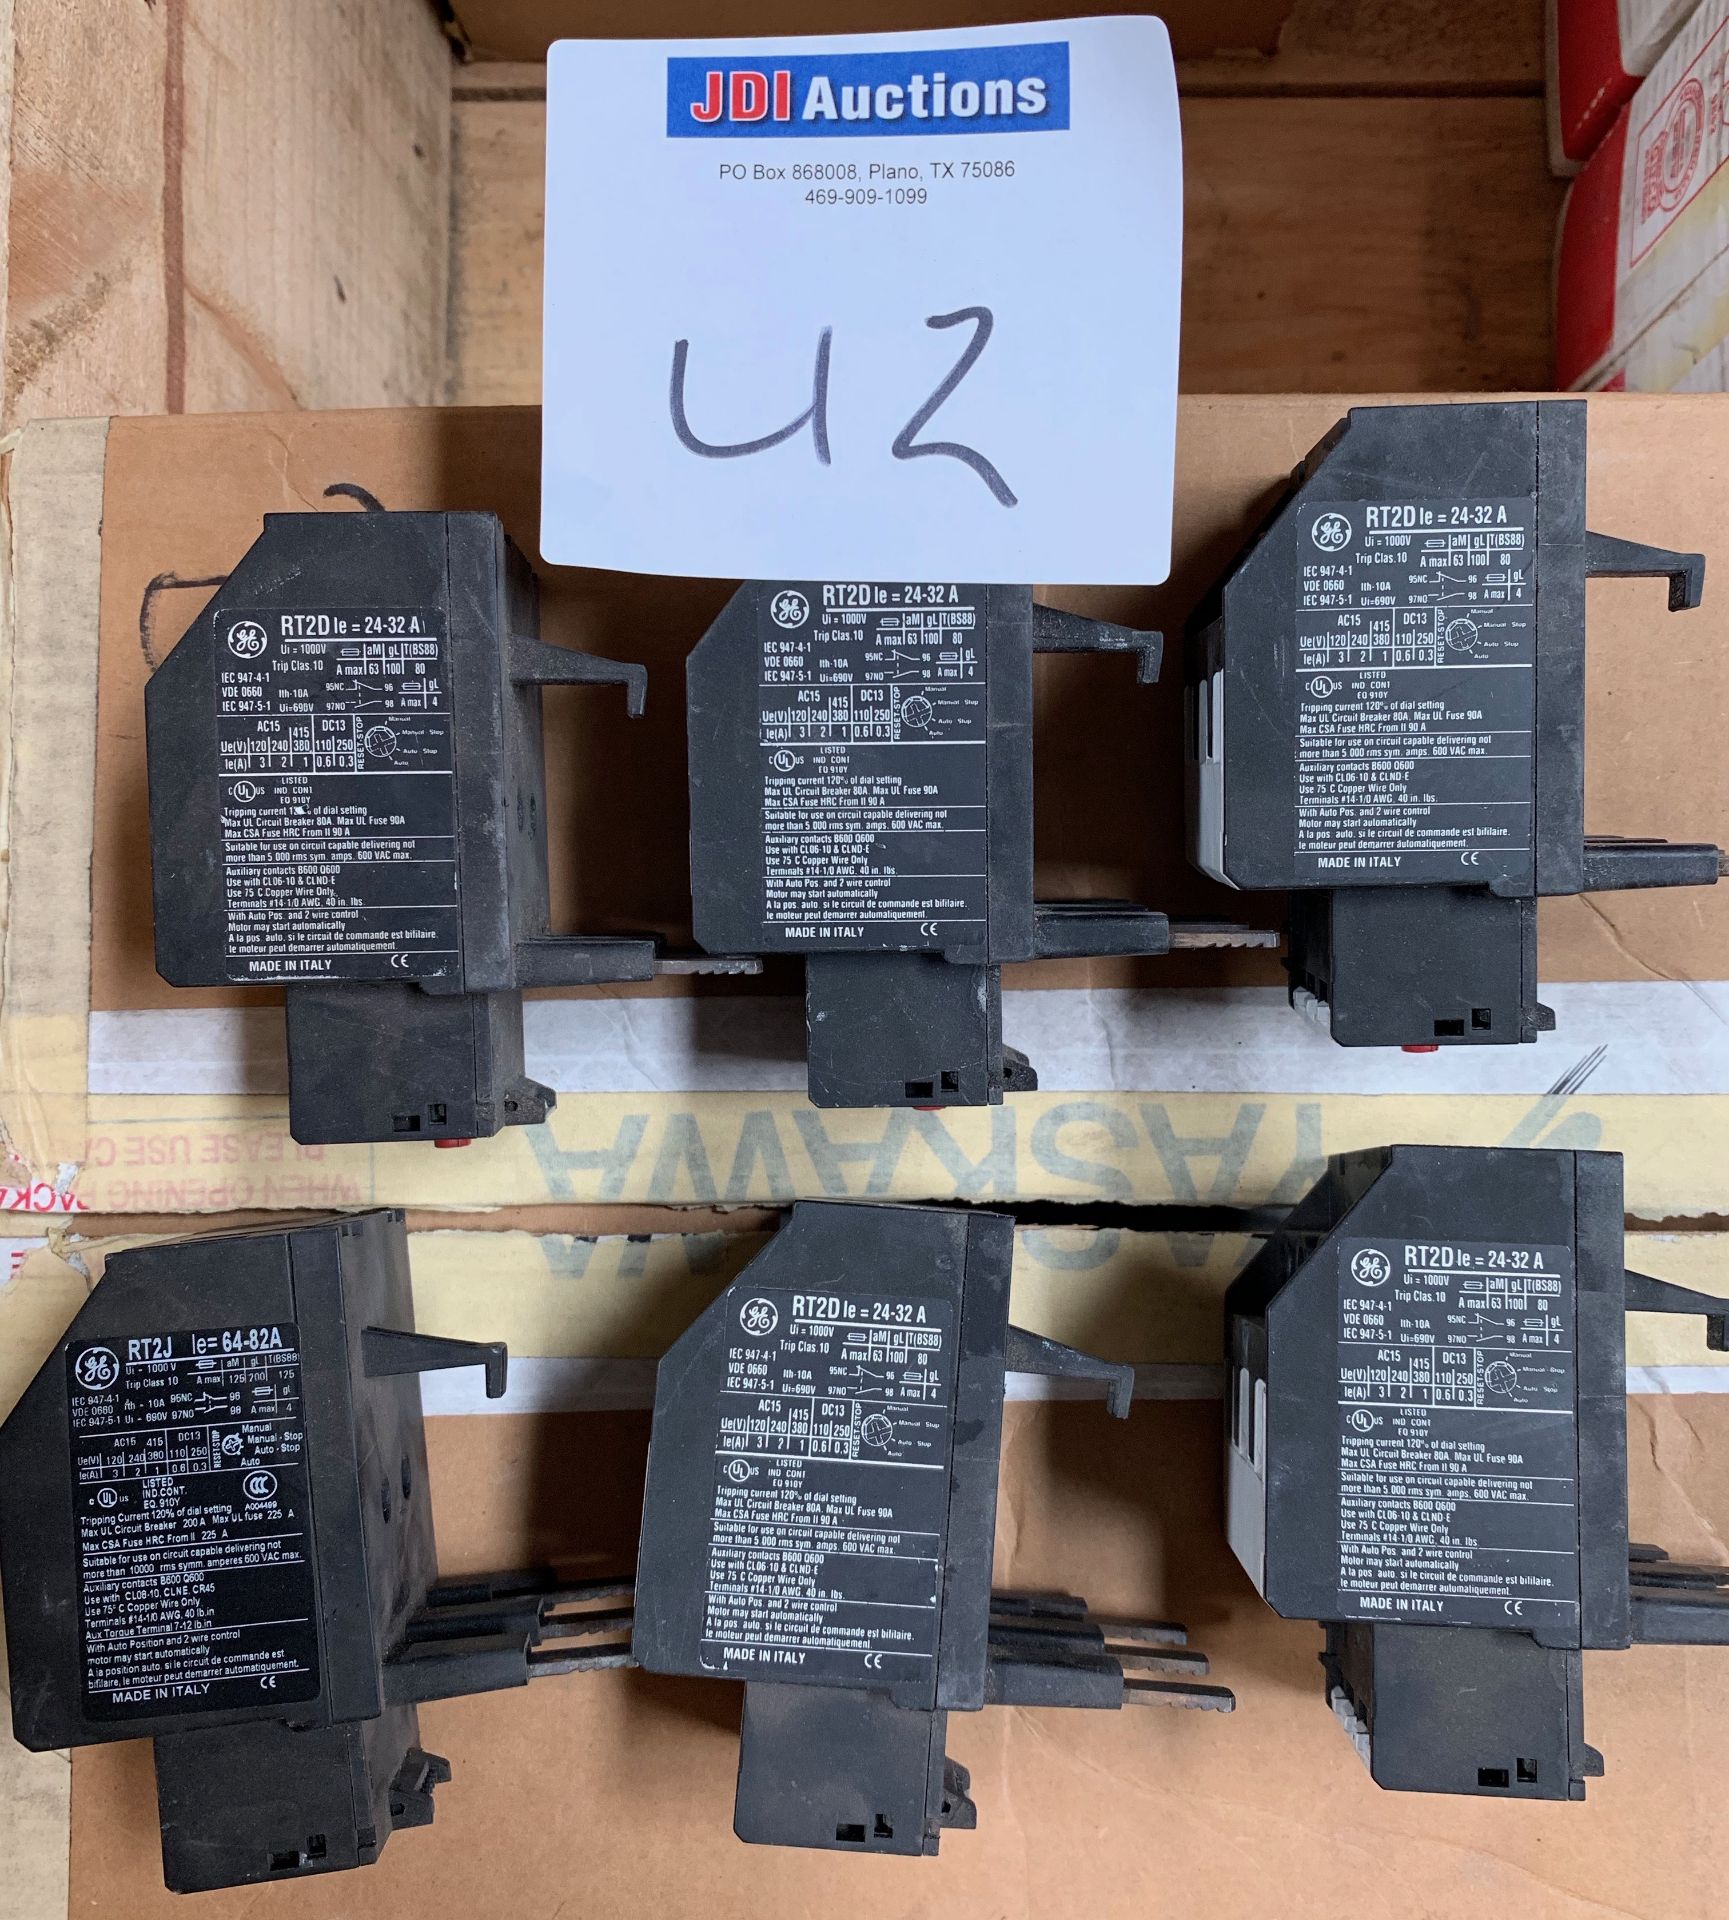 (6) GE Cat # RT2D Overload Relay, 24-32 Amps, Auto/Manual - Qty. 6